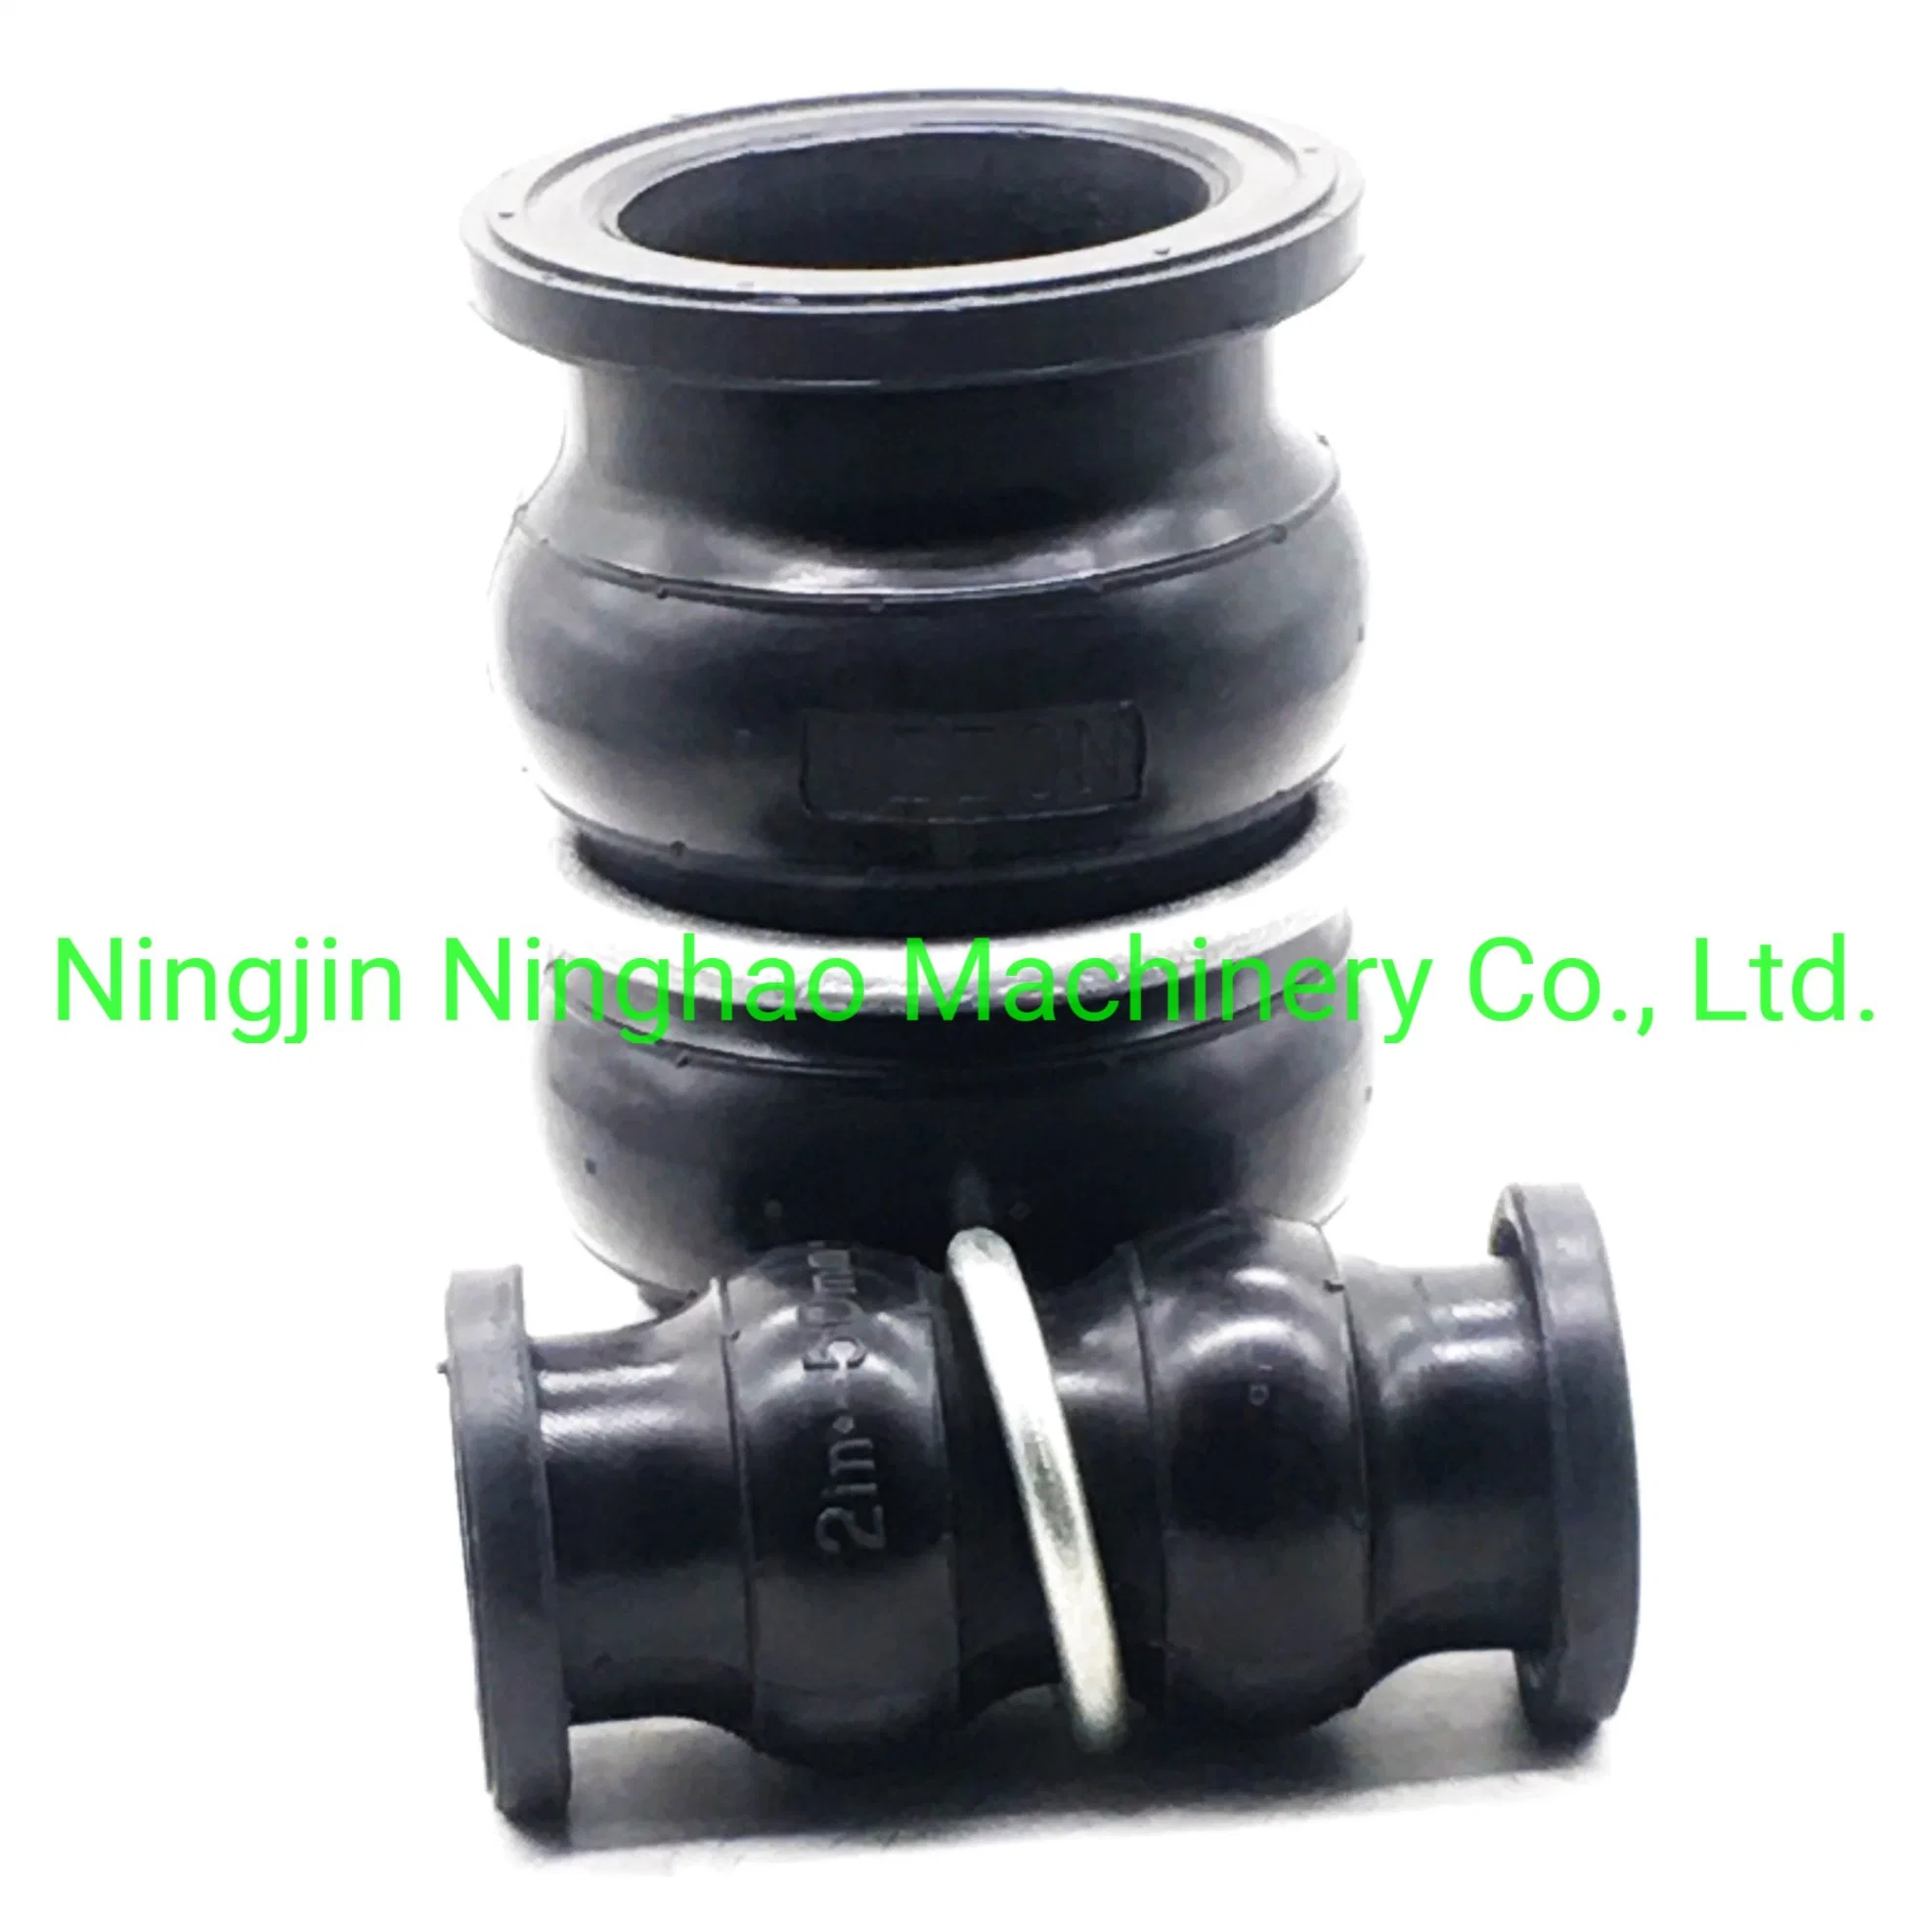 Double Sphere Rubber Joint with Flange